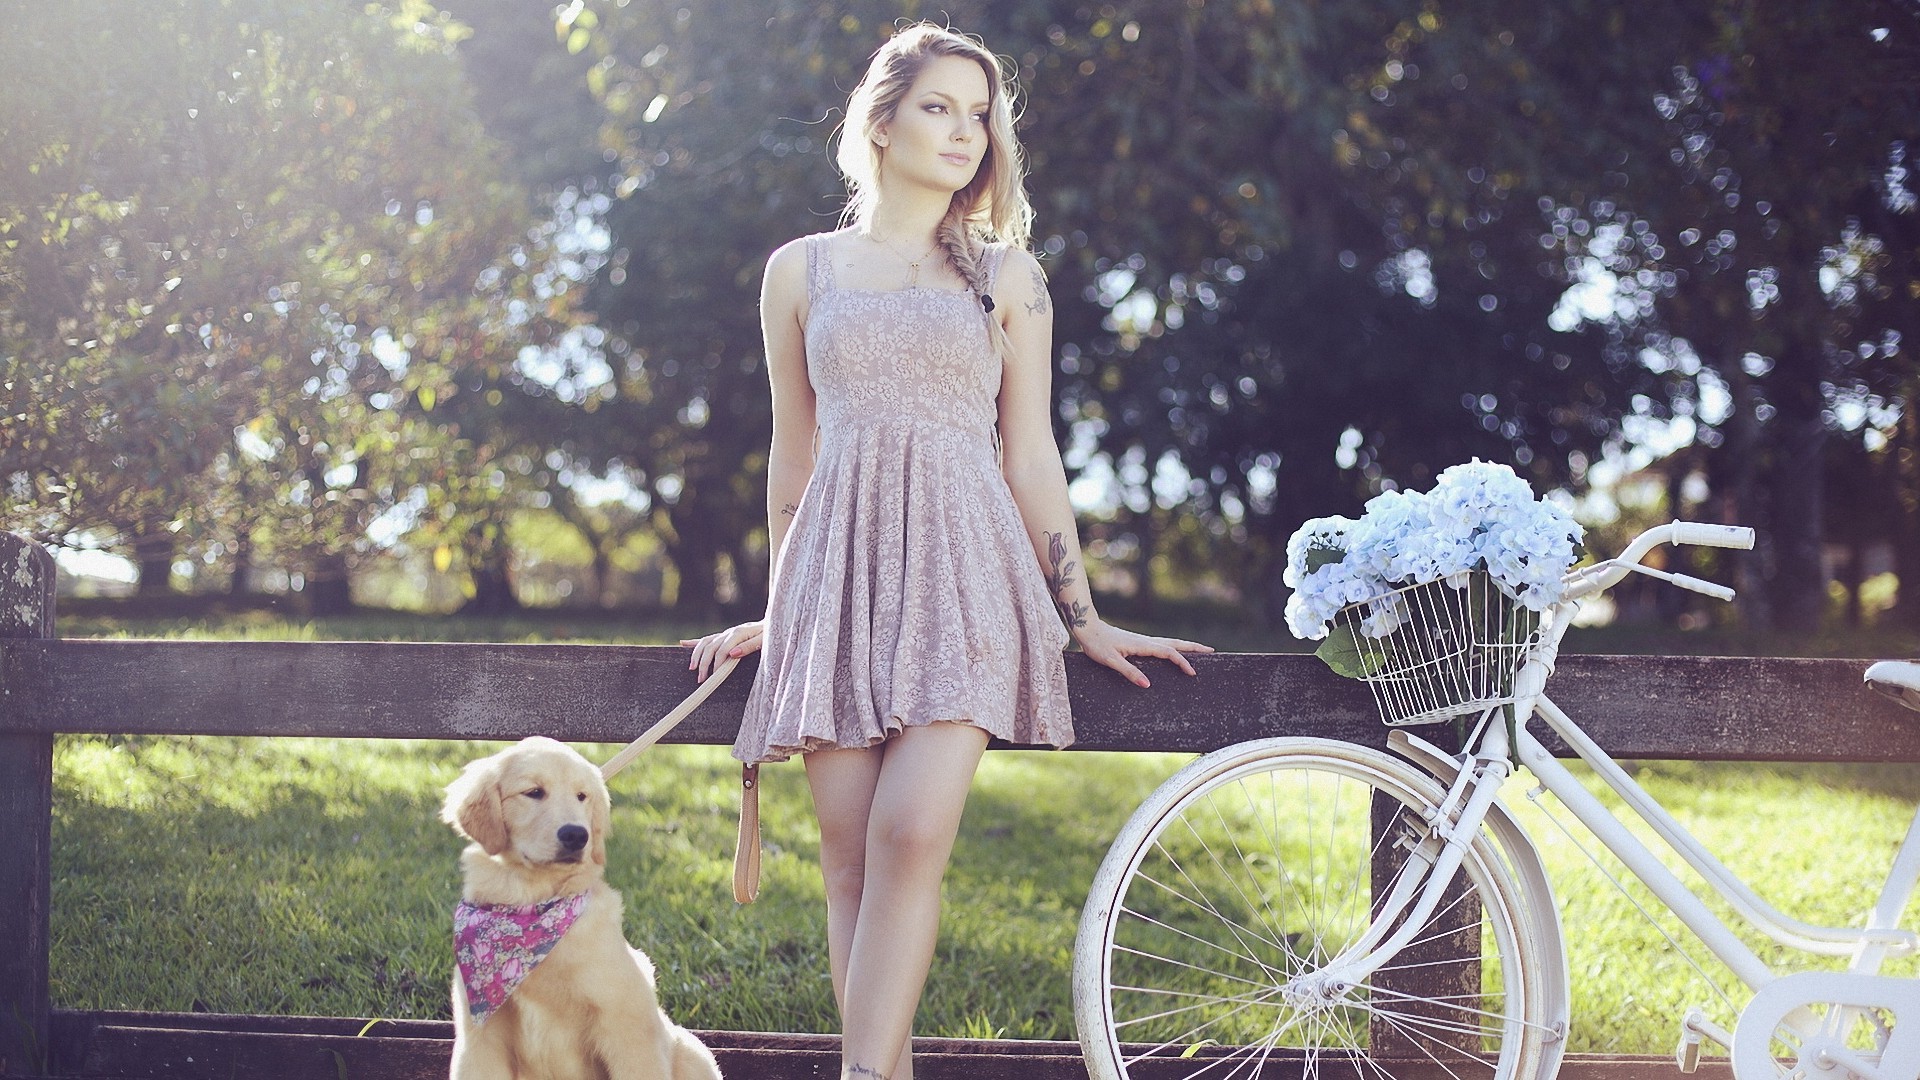 blonde, Tattoo, Skirt, Dog, Bicycle, Flowers, Model, Women Wallpapers